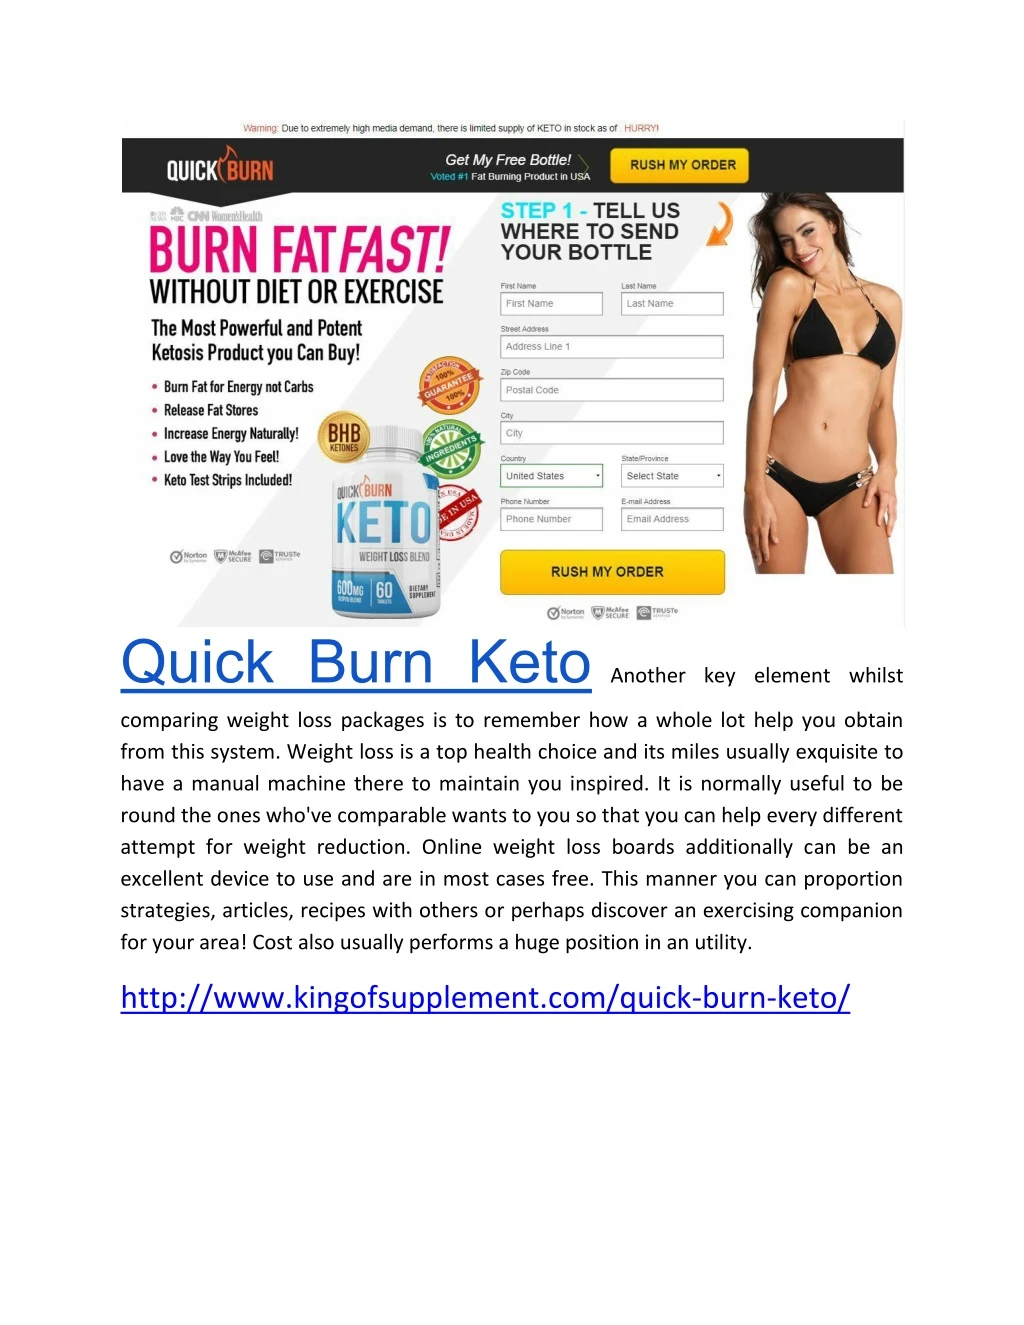 quick burn keto another key element whilst